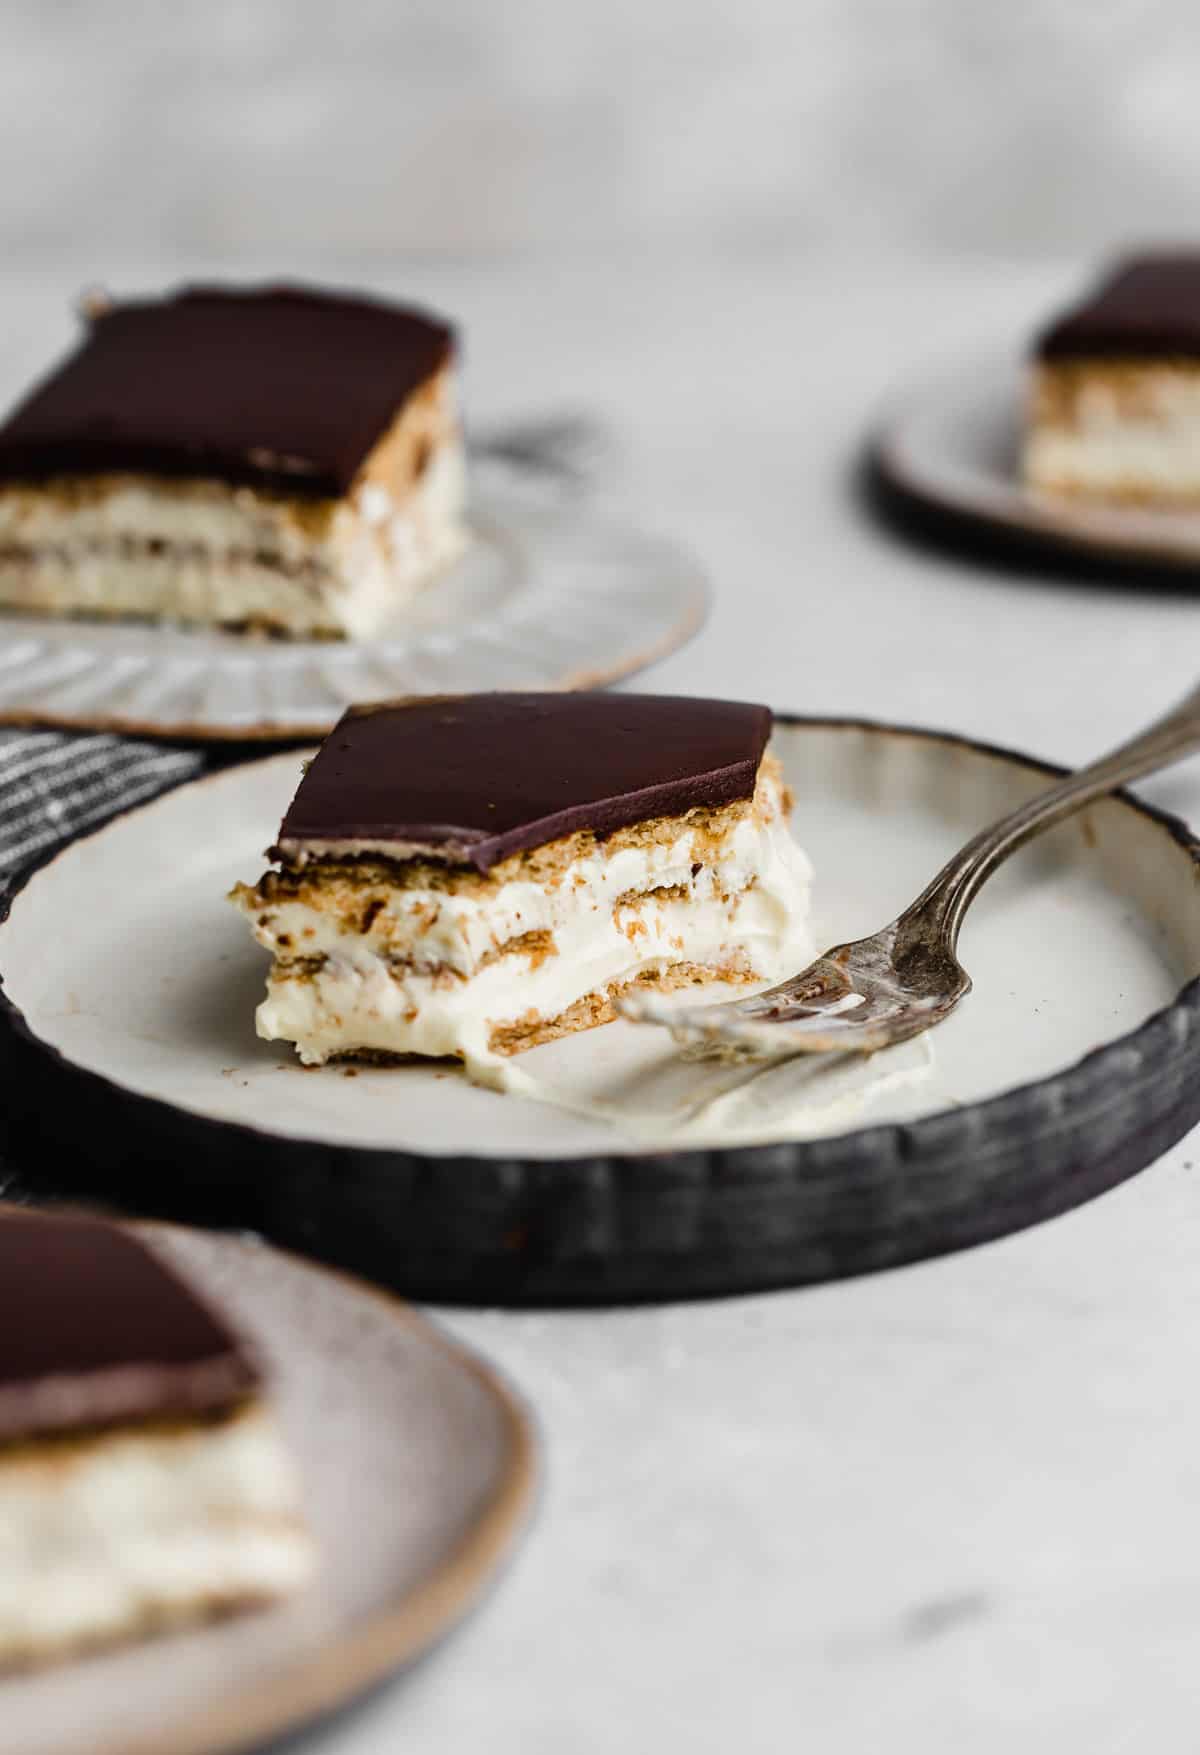 A no bake Chocolate Eclair Cake made with alternating layers of graham cracker and instant pudding (topped with chocolate) on a plate.